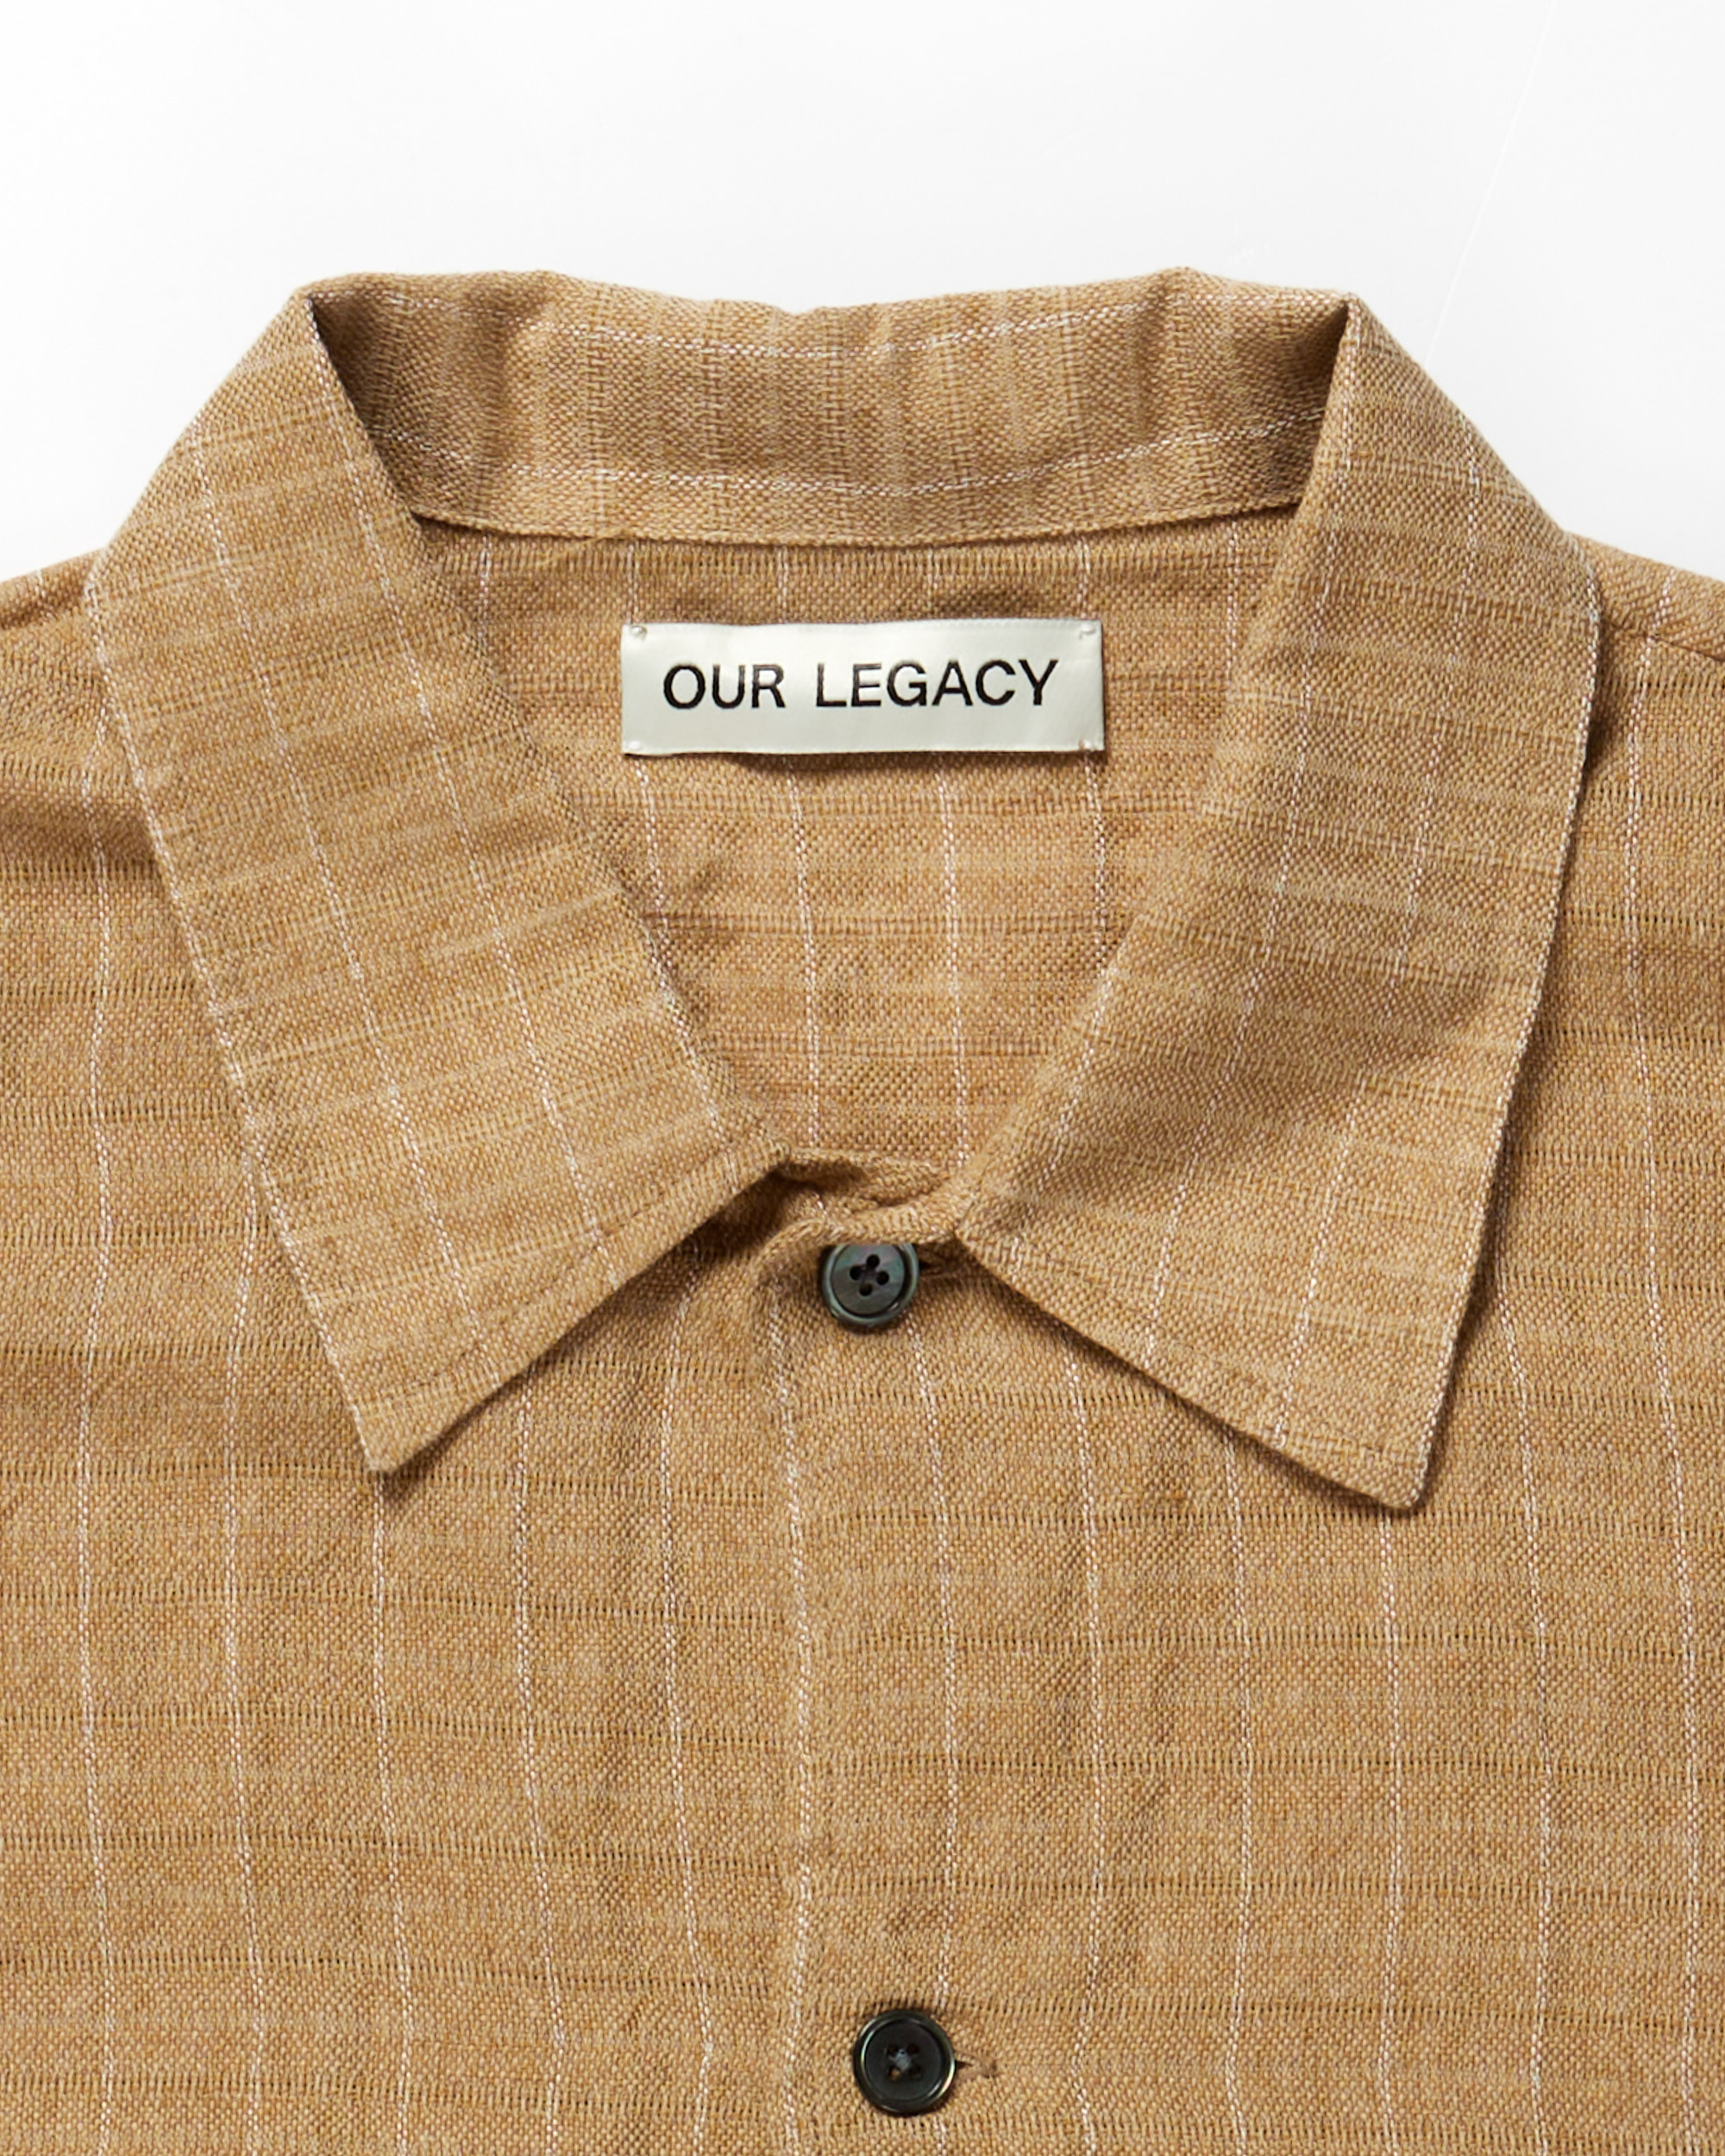 Elder Shirt S/S Our Legacy Tops Shirts Beige